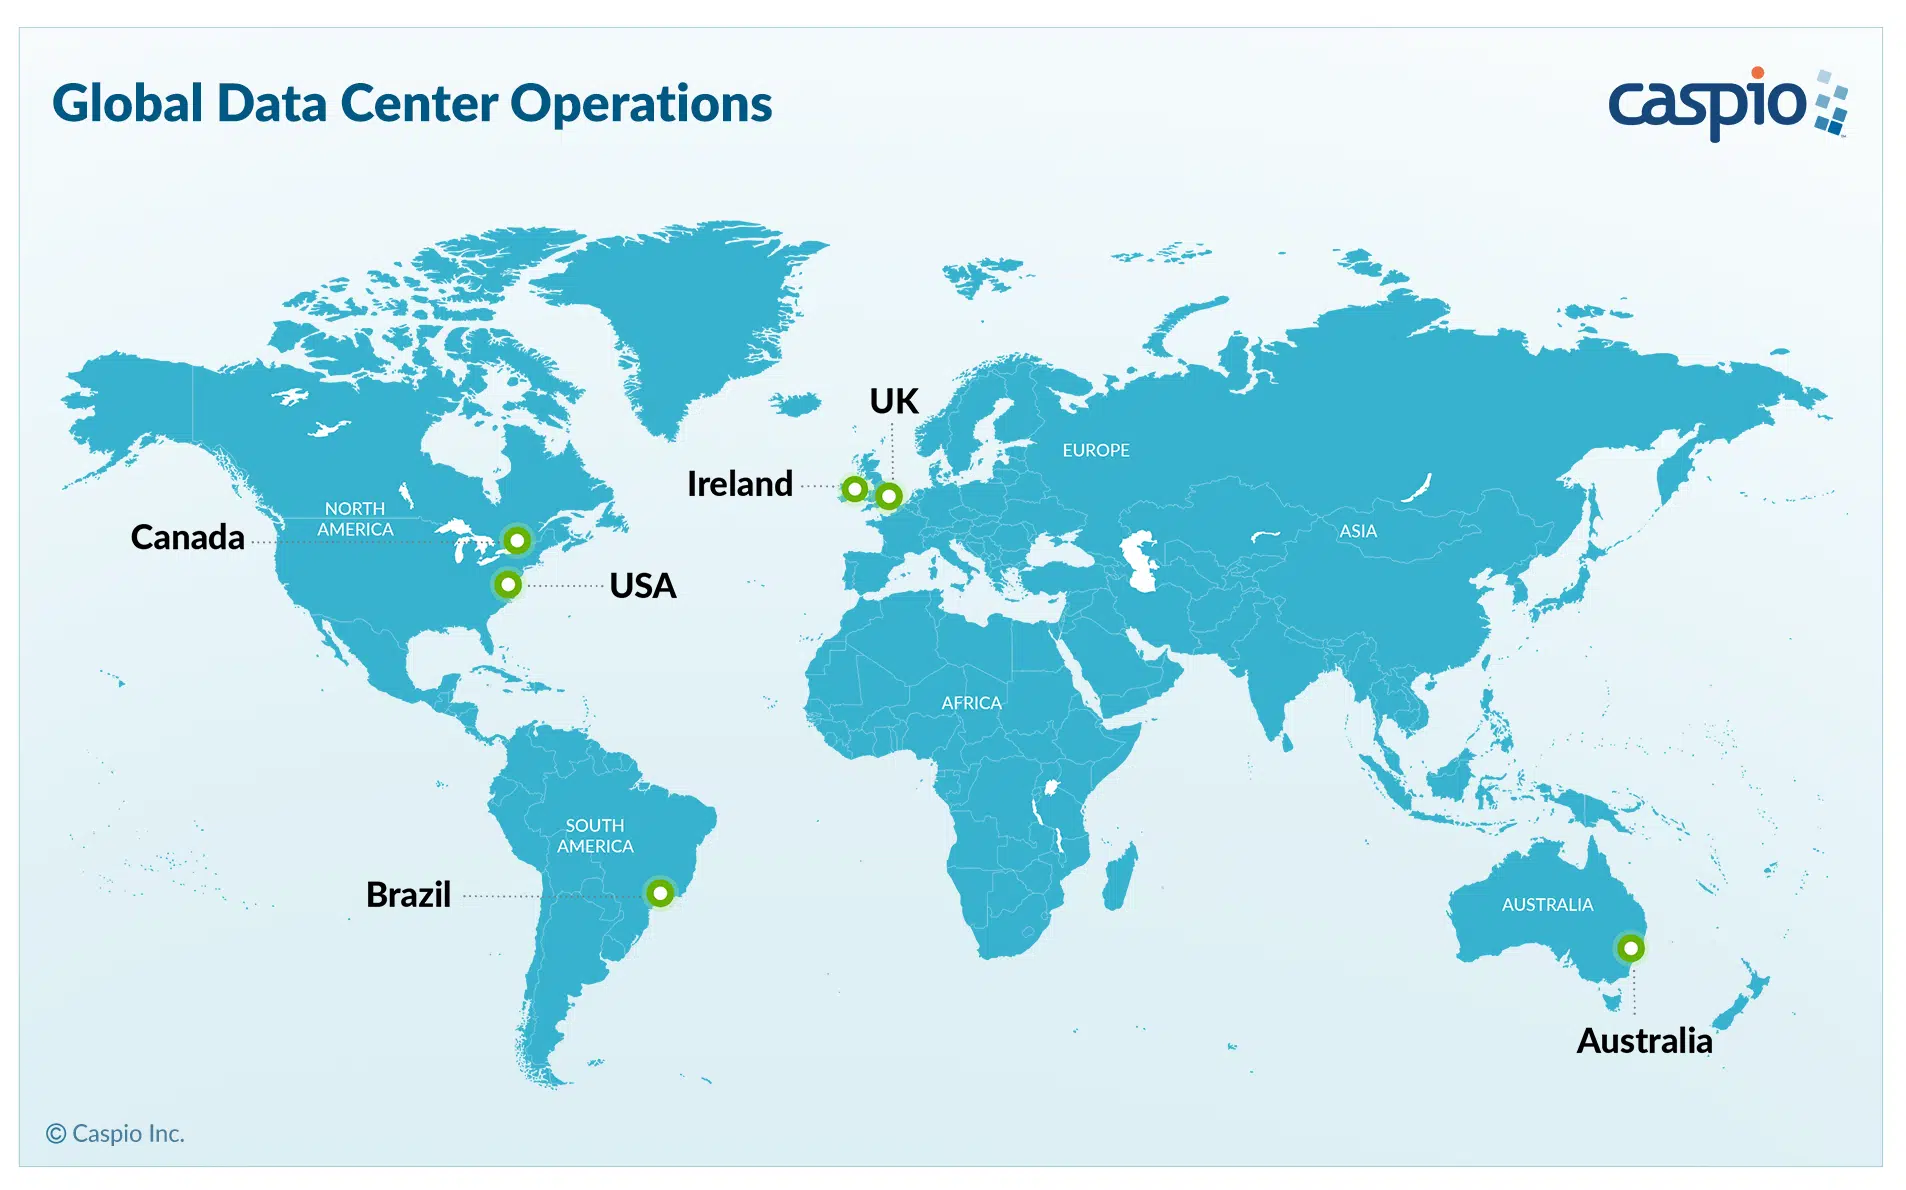 Caspio is opening more data centers across the globe to bring your apps and data closer to your users.